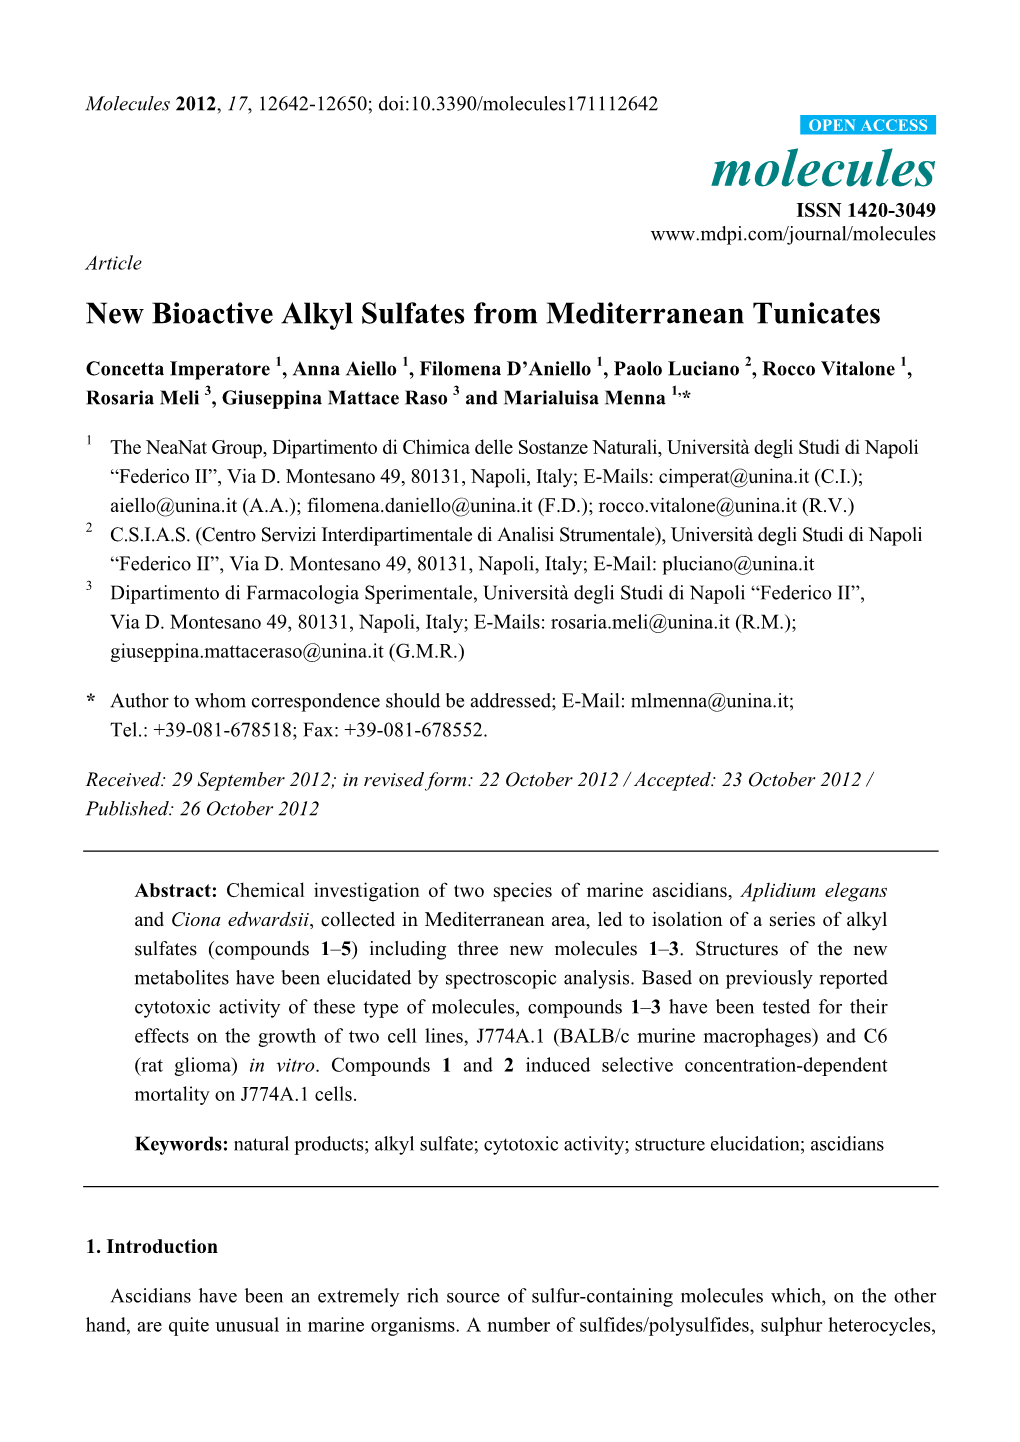 New Bioactive Alkyl Sulfates from Mediterranean Tunicates